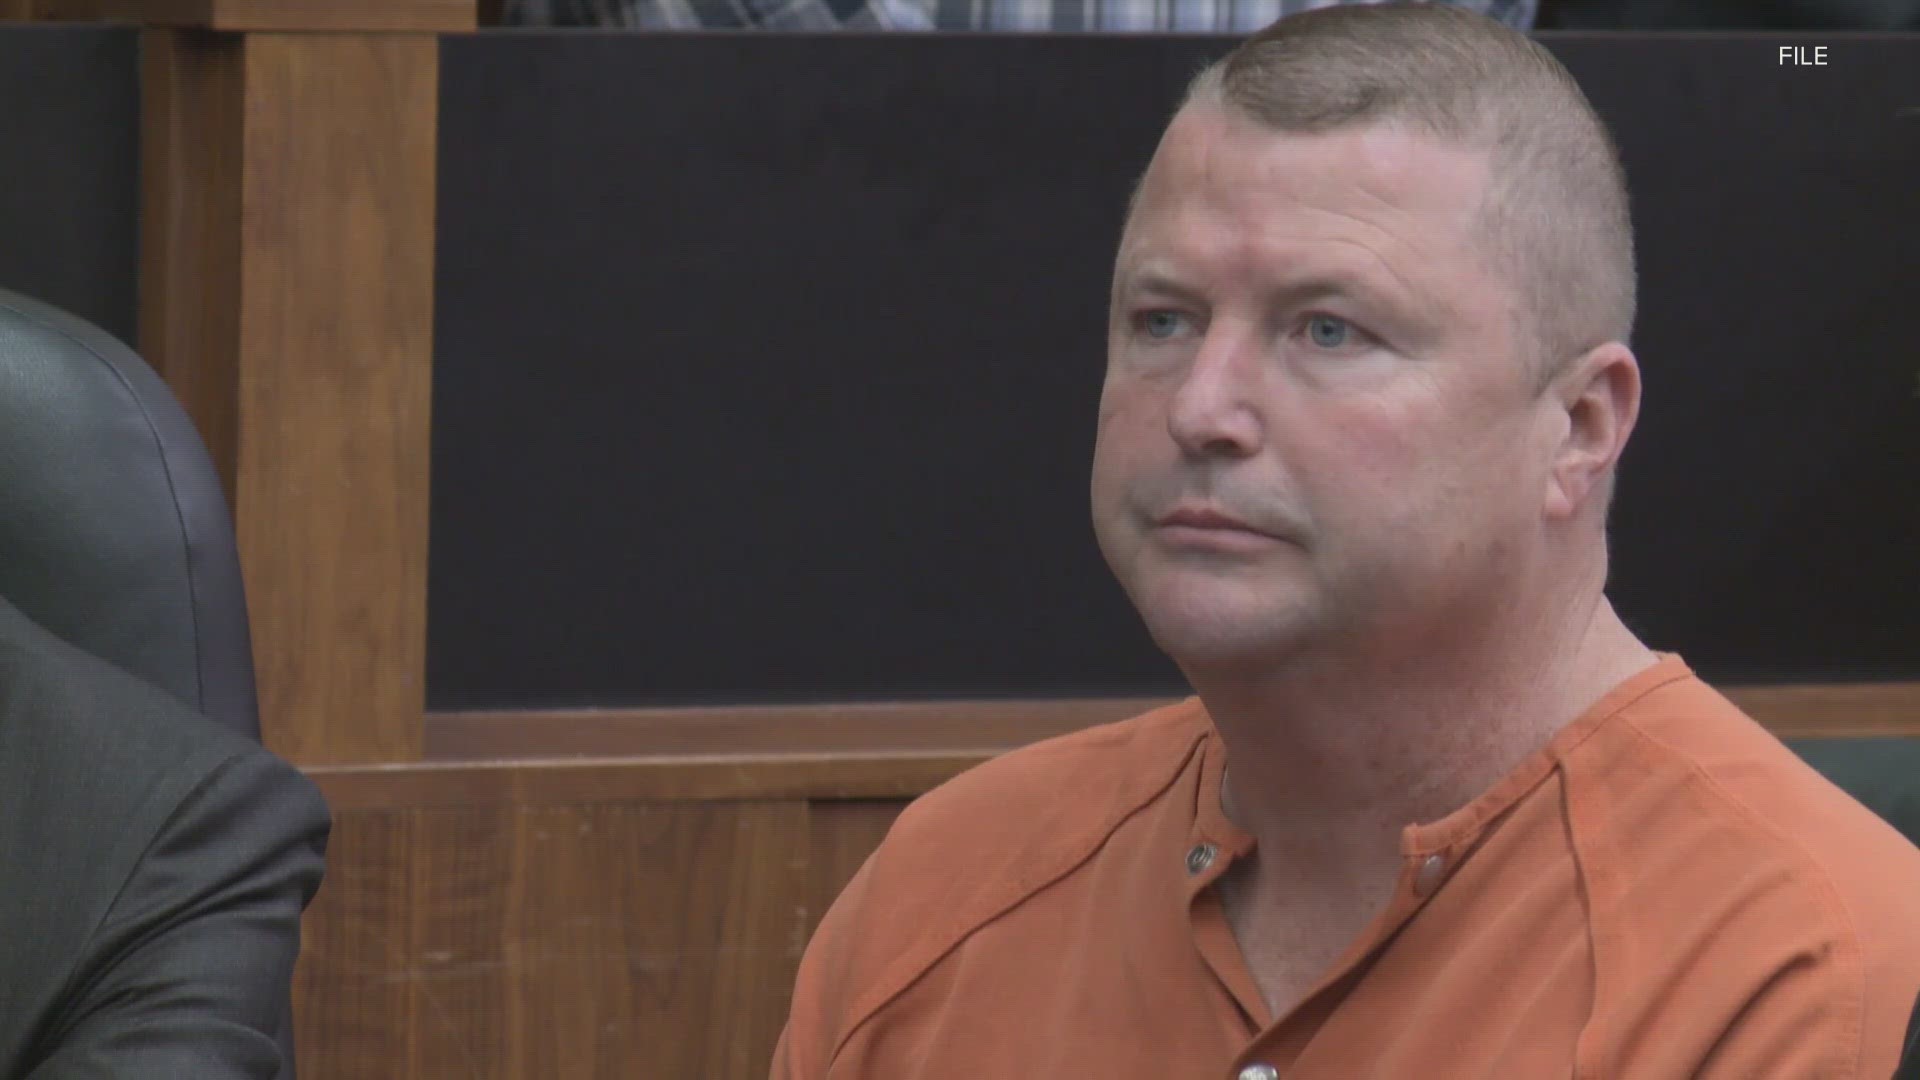 Jamey Noel's next court appearance is scheduled for Jan. 8, 2024.